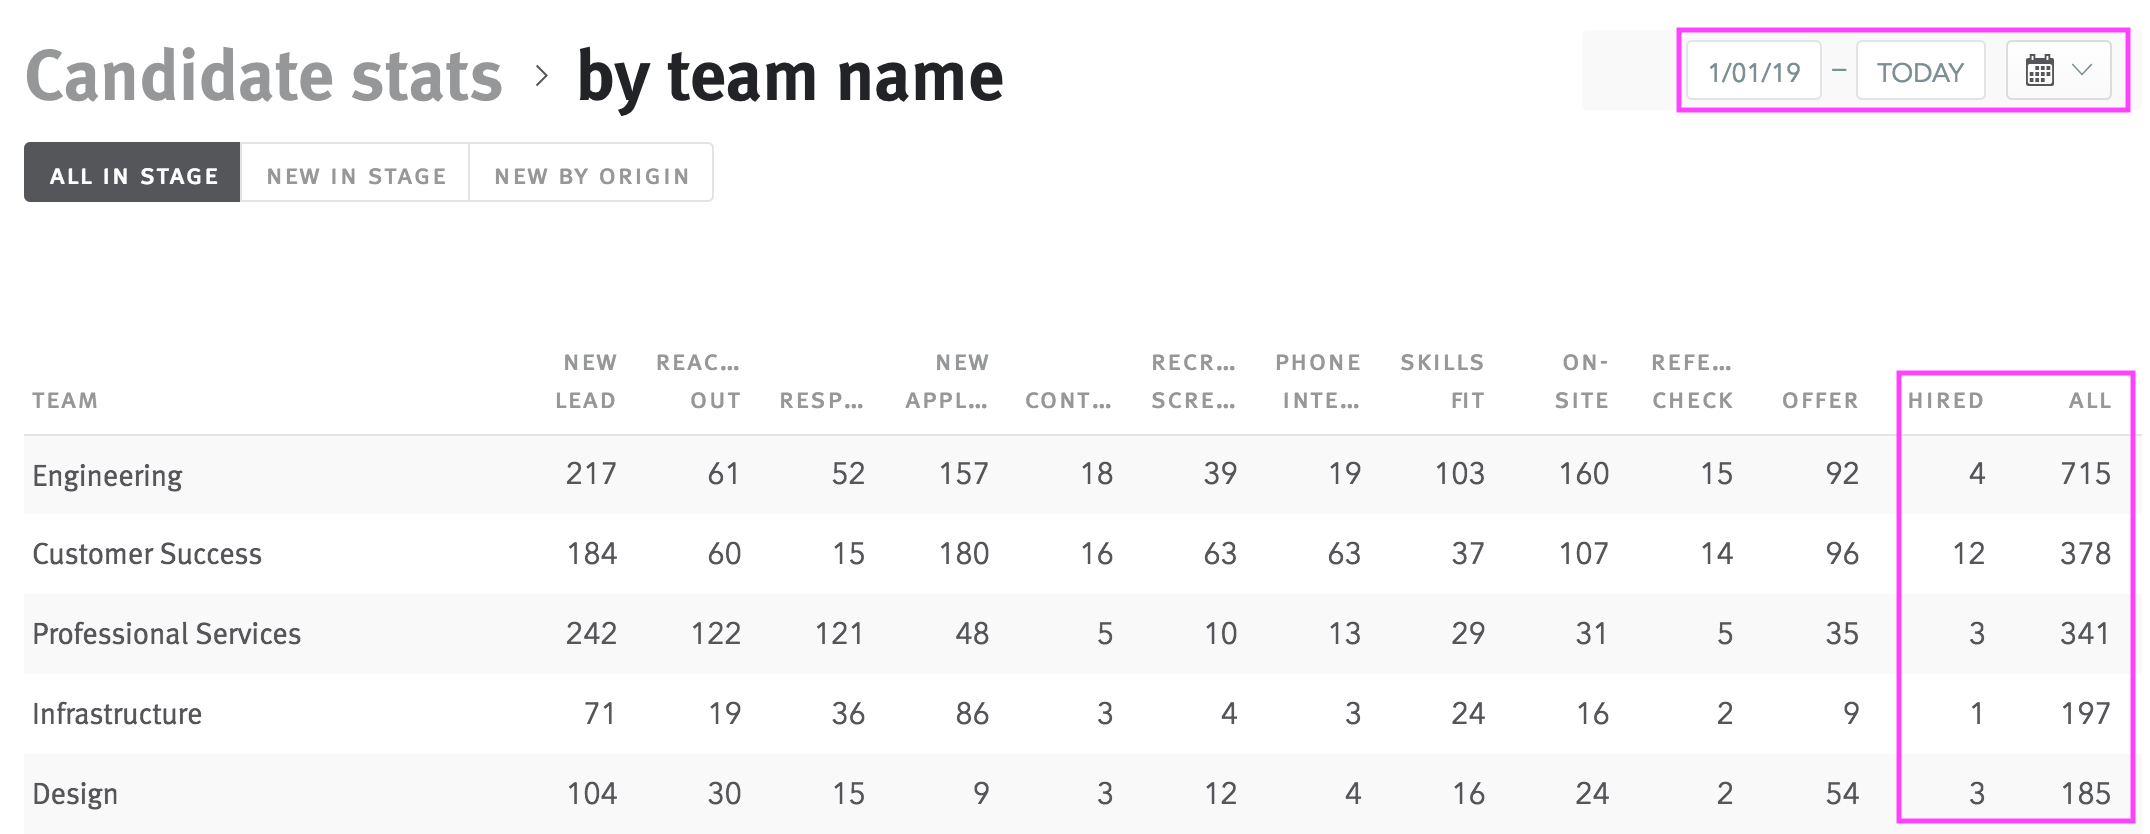 Candidate stats by team name report with hired tallies and date range filter outlined